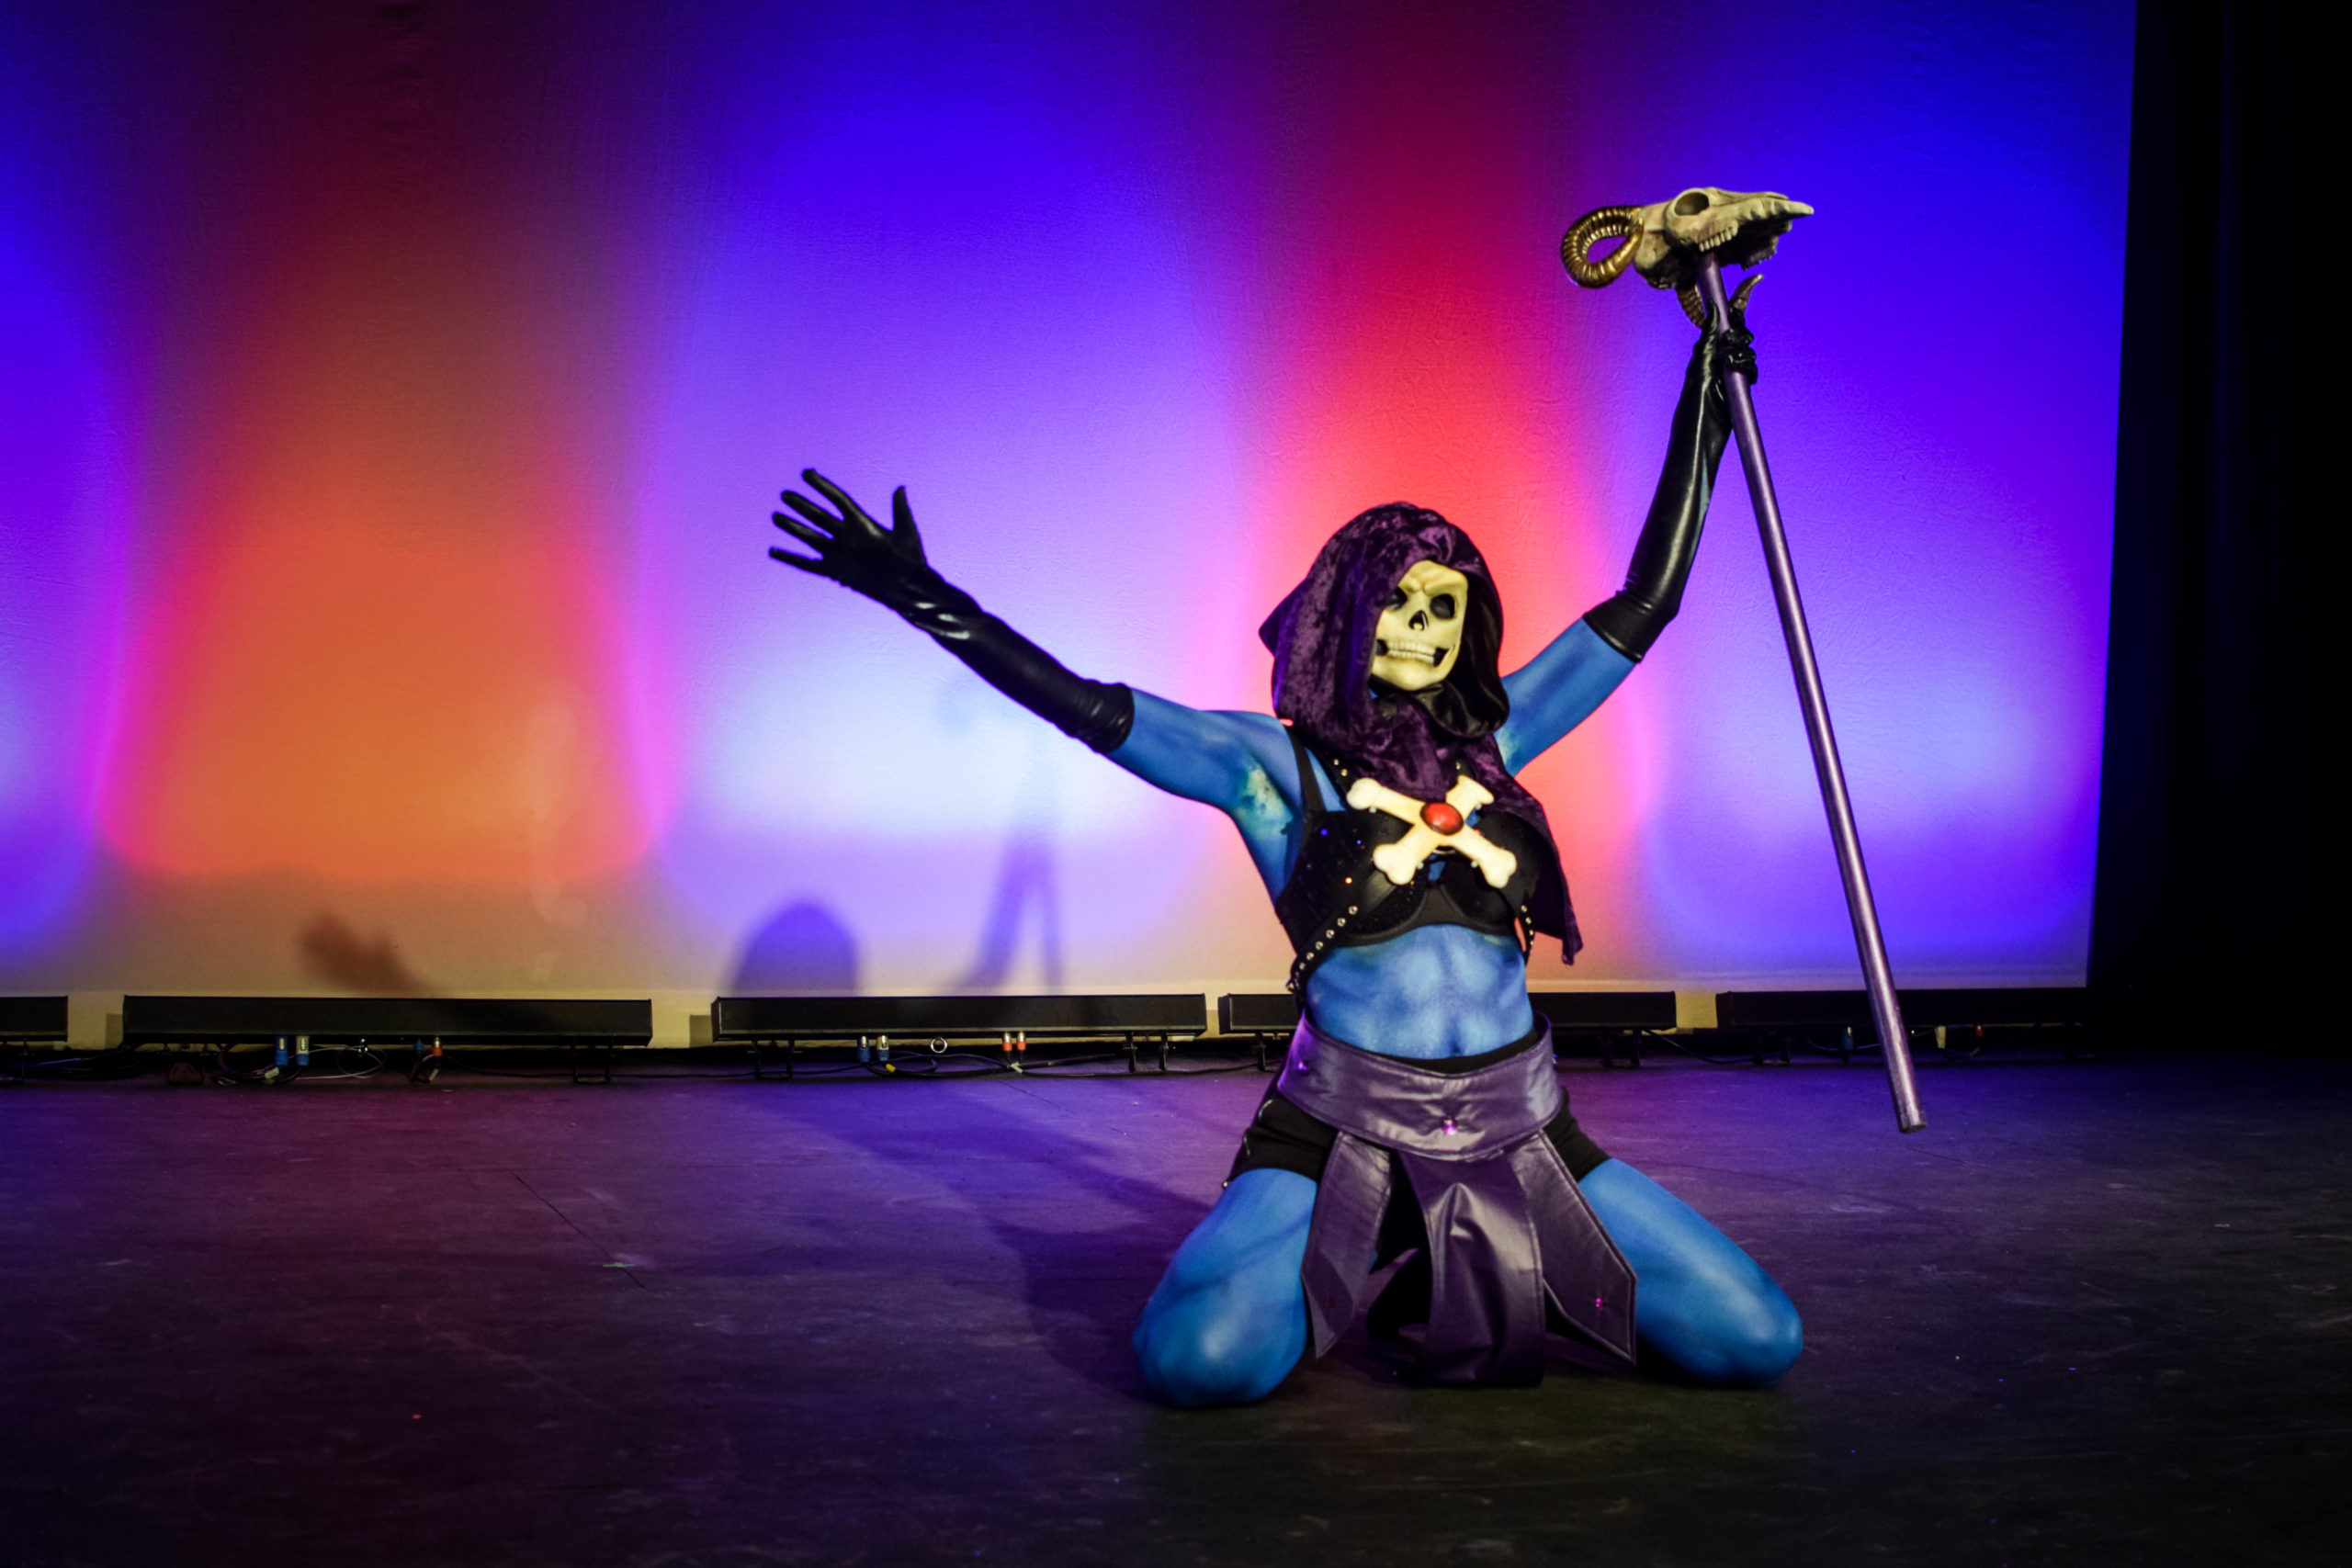 Sable Switch performing as Skeletor at the 2017 NOLA Nerdlesque Festival. Photo via Mis Guided